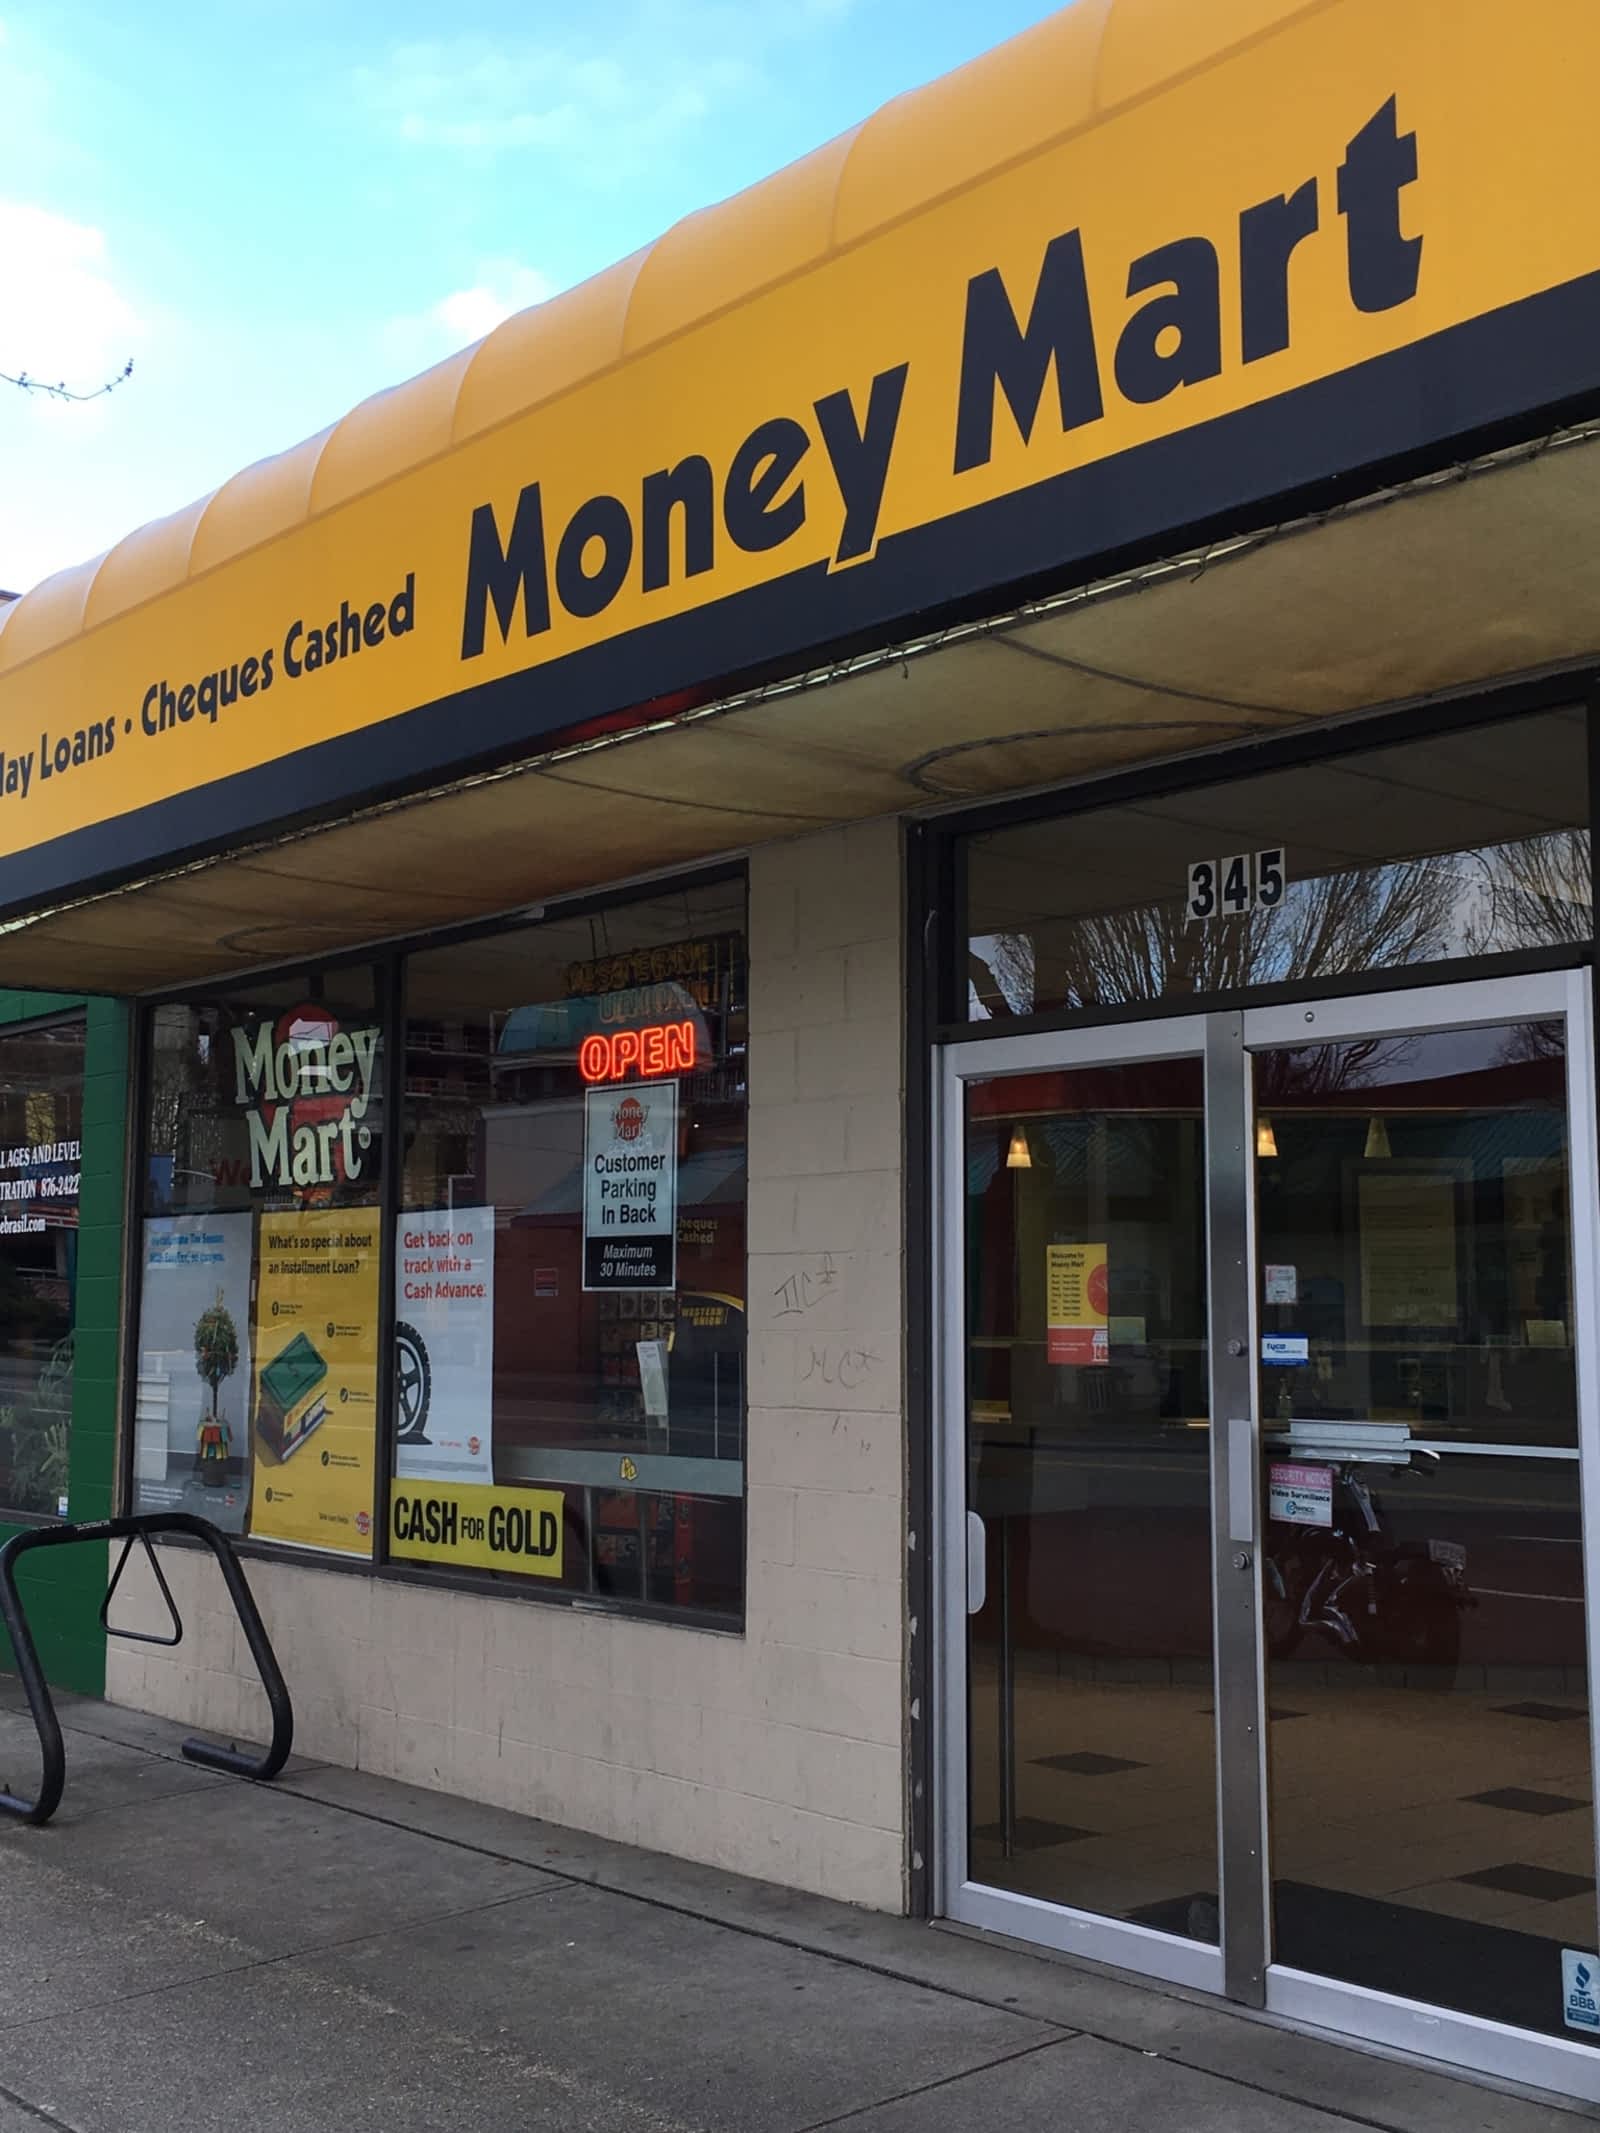 payday loans in Waverly